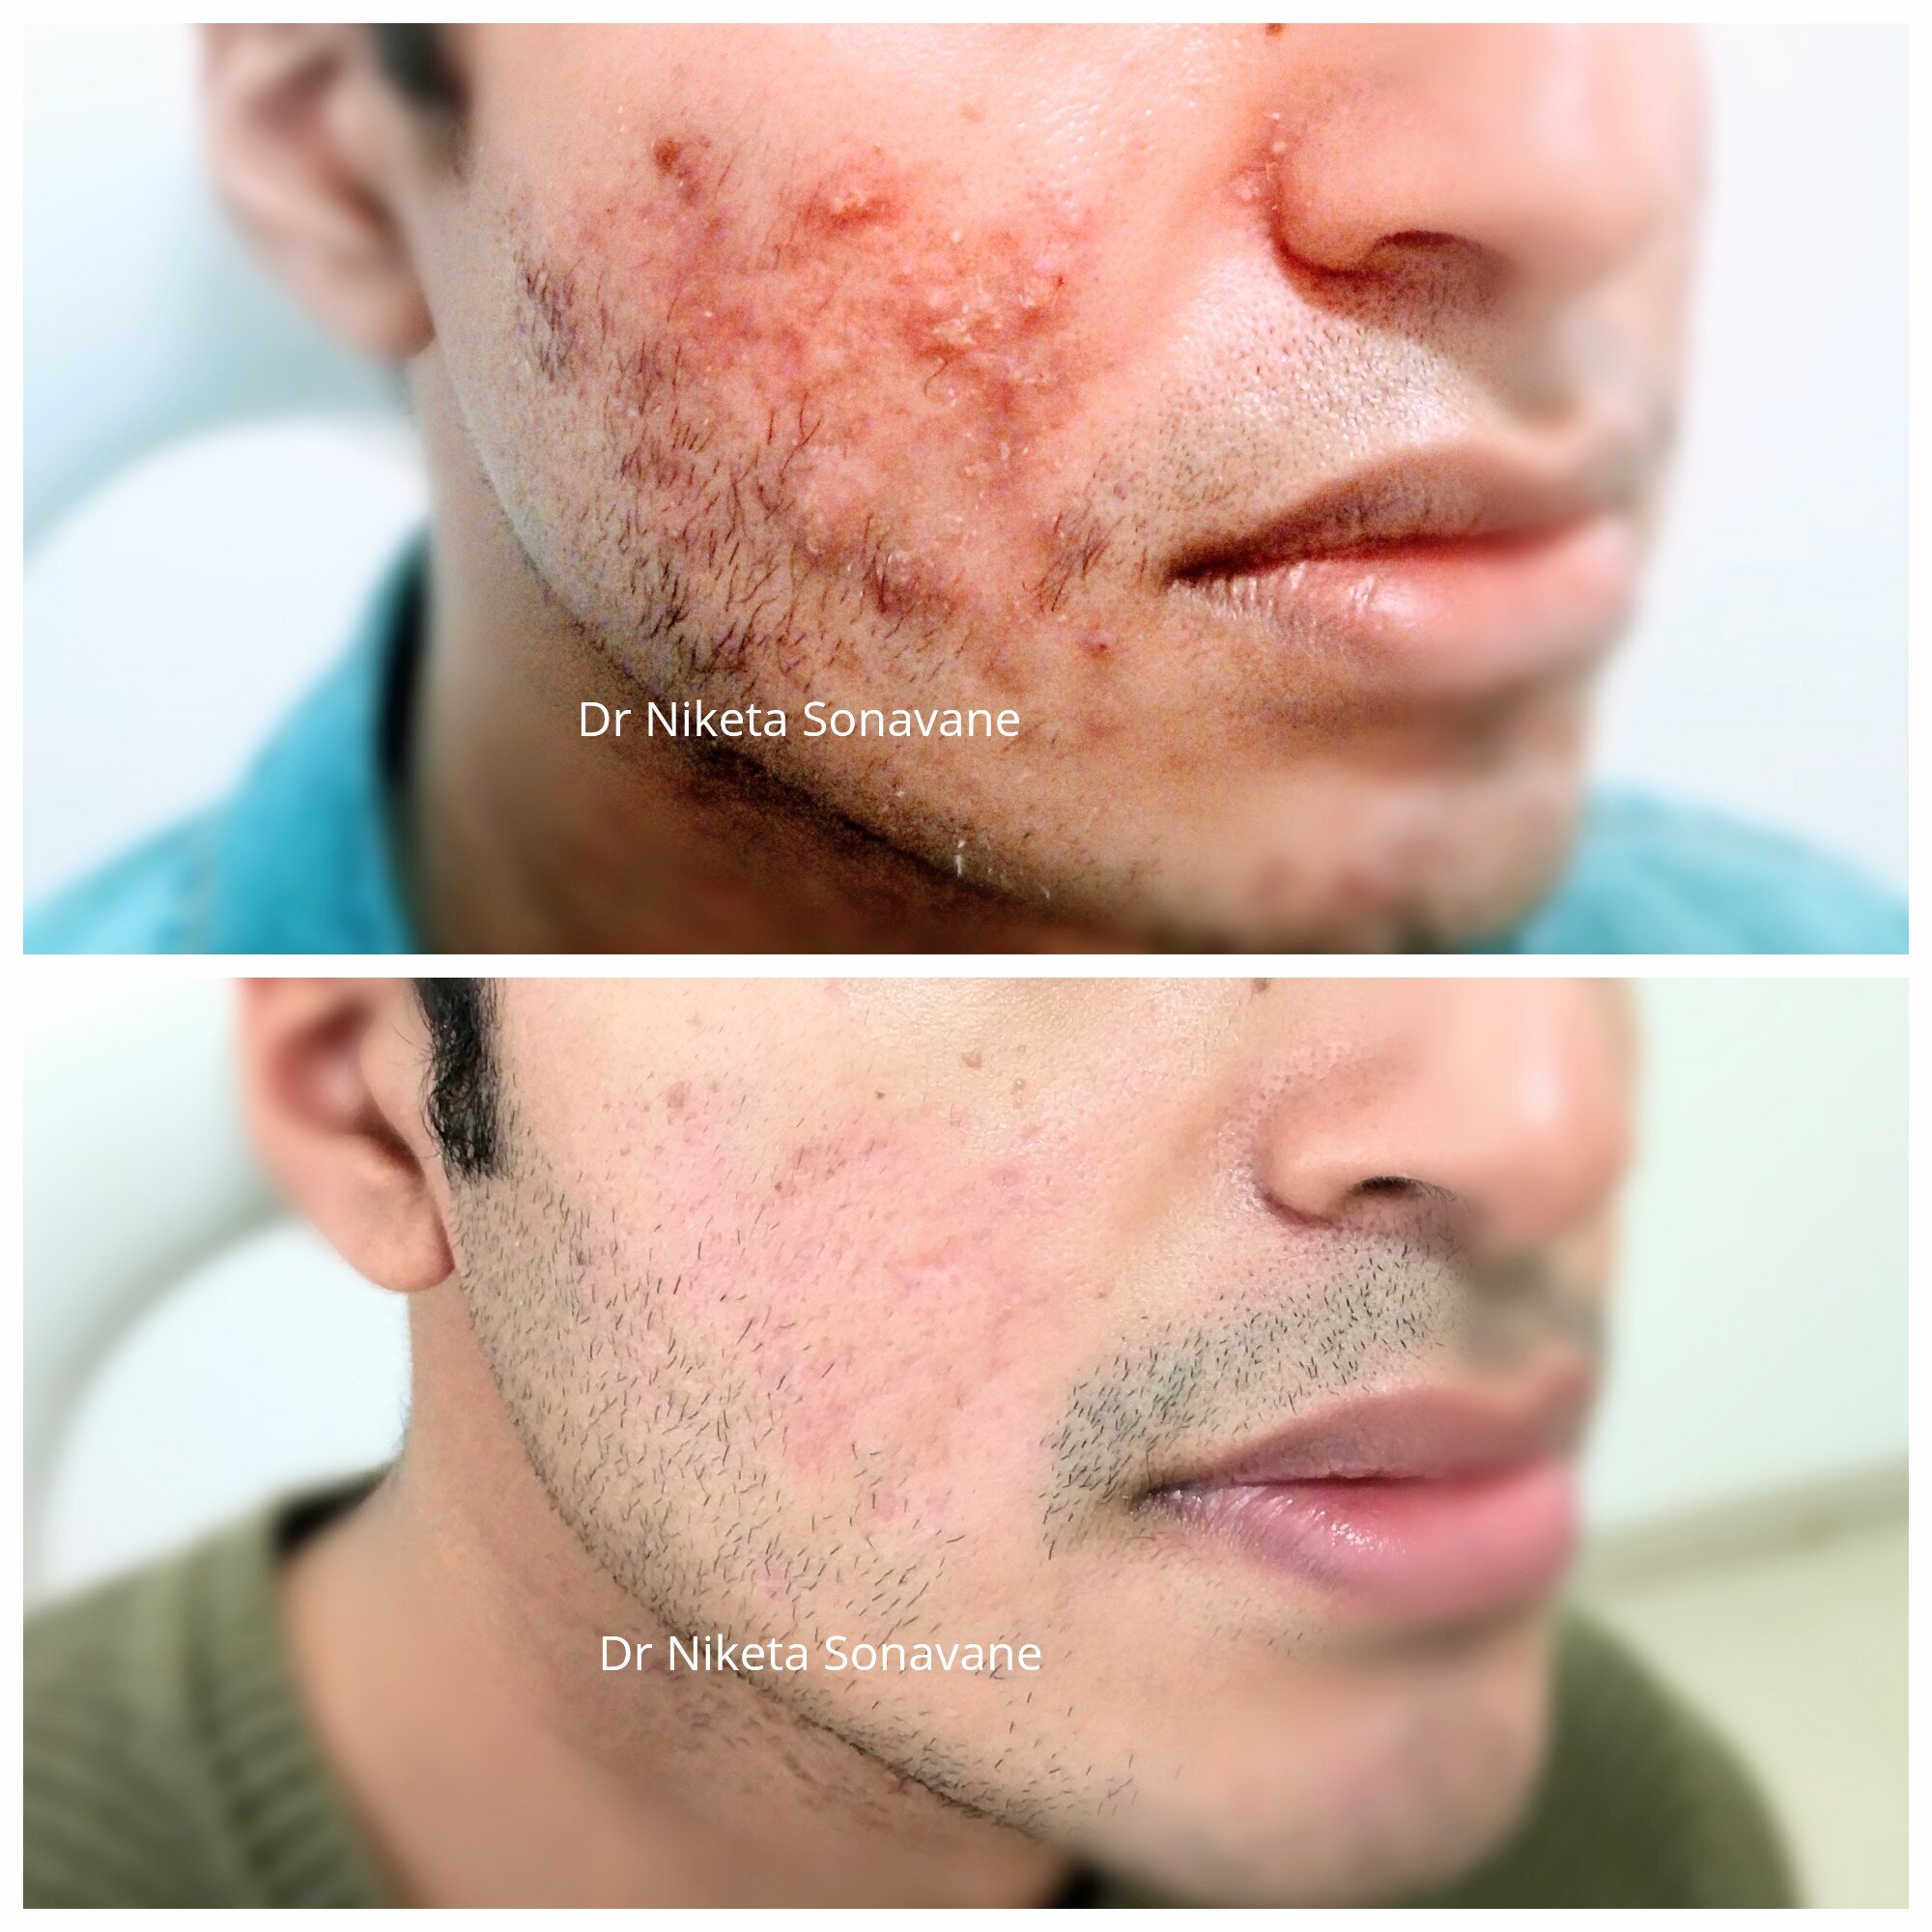 Acne Treatment In Mumbai - Cost, Before After, Laser, Acne Specialist